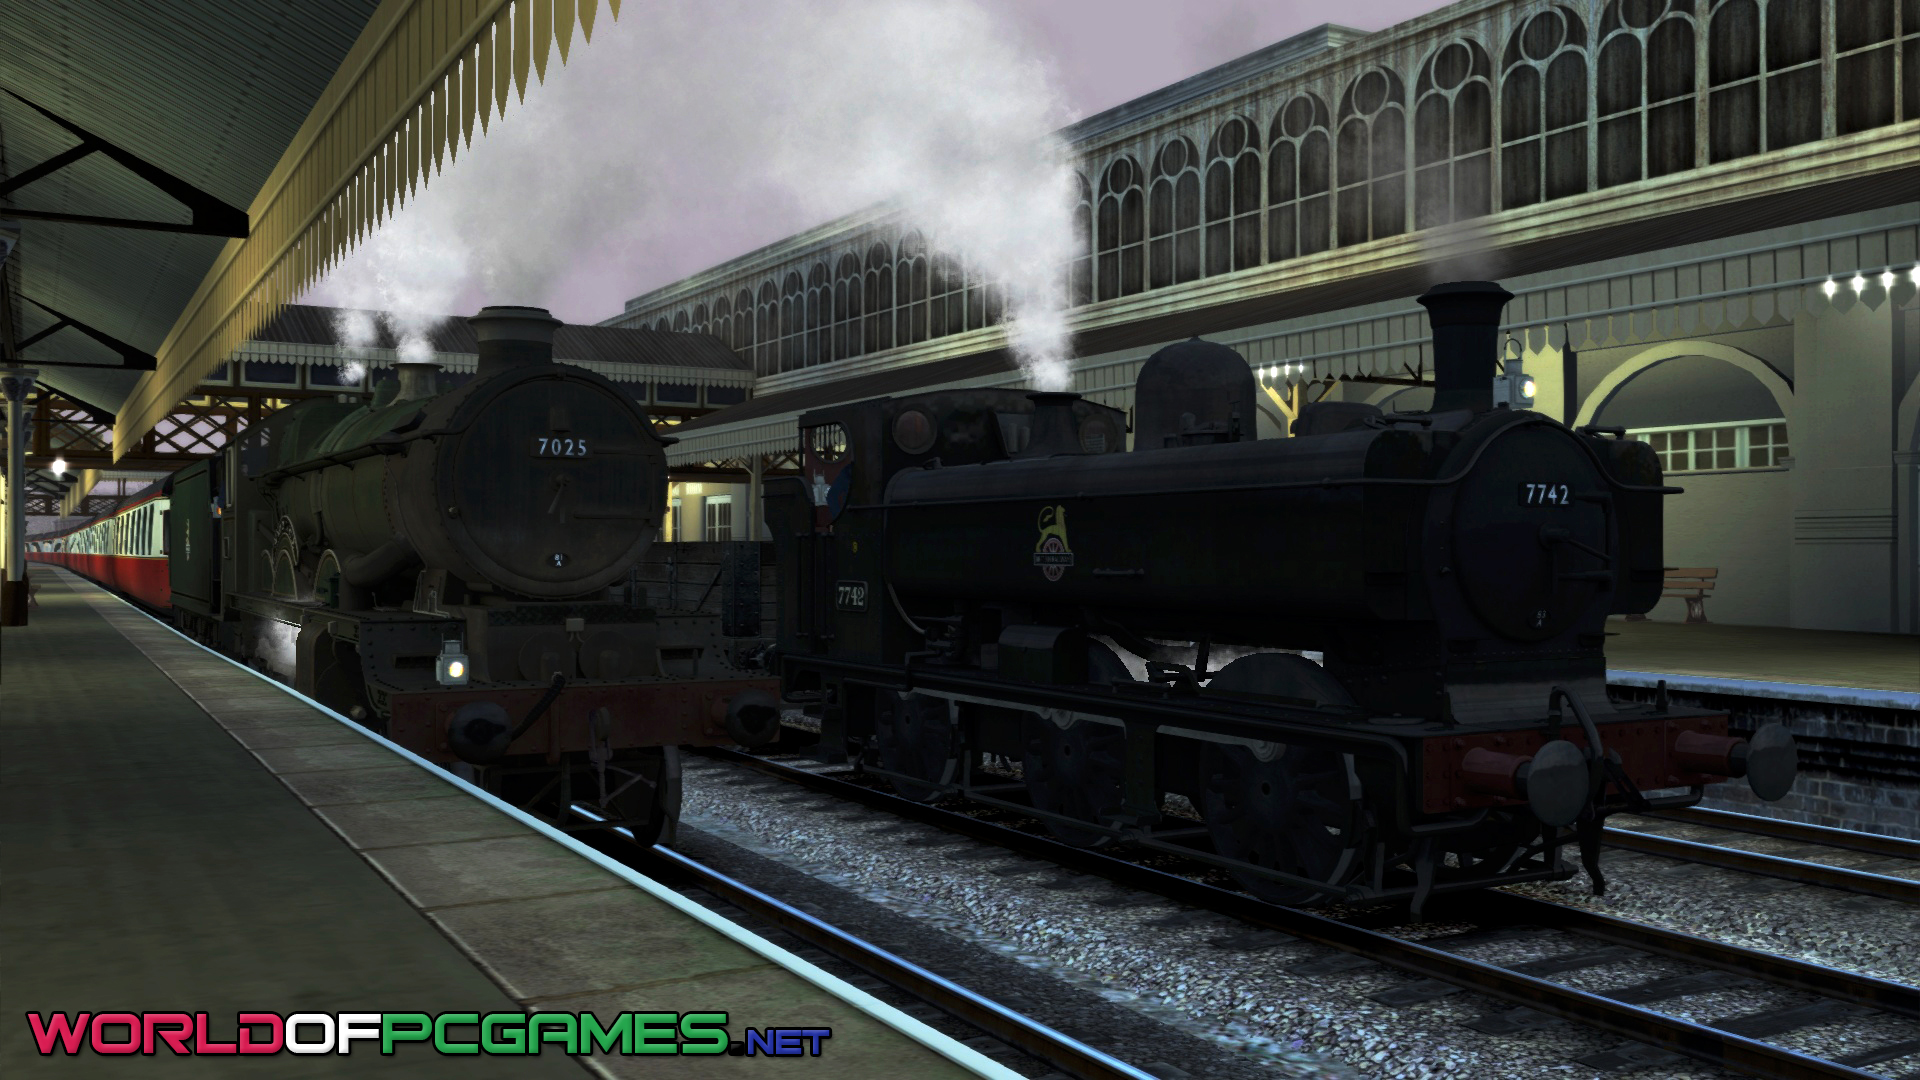 Train Simulator 2017 Free Download With All DLCs - 13